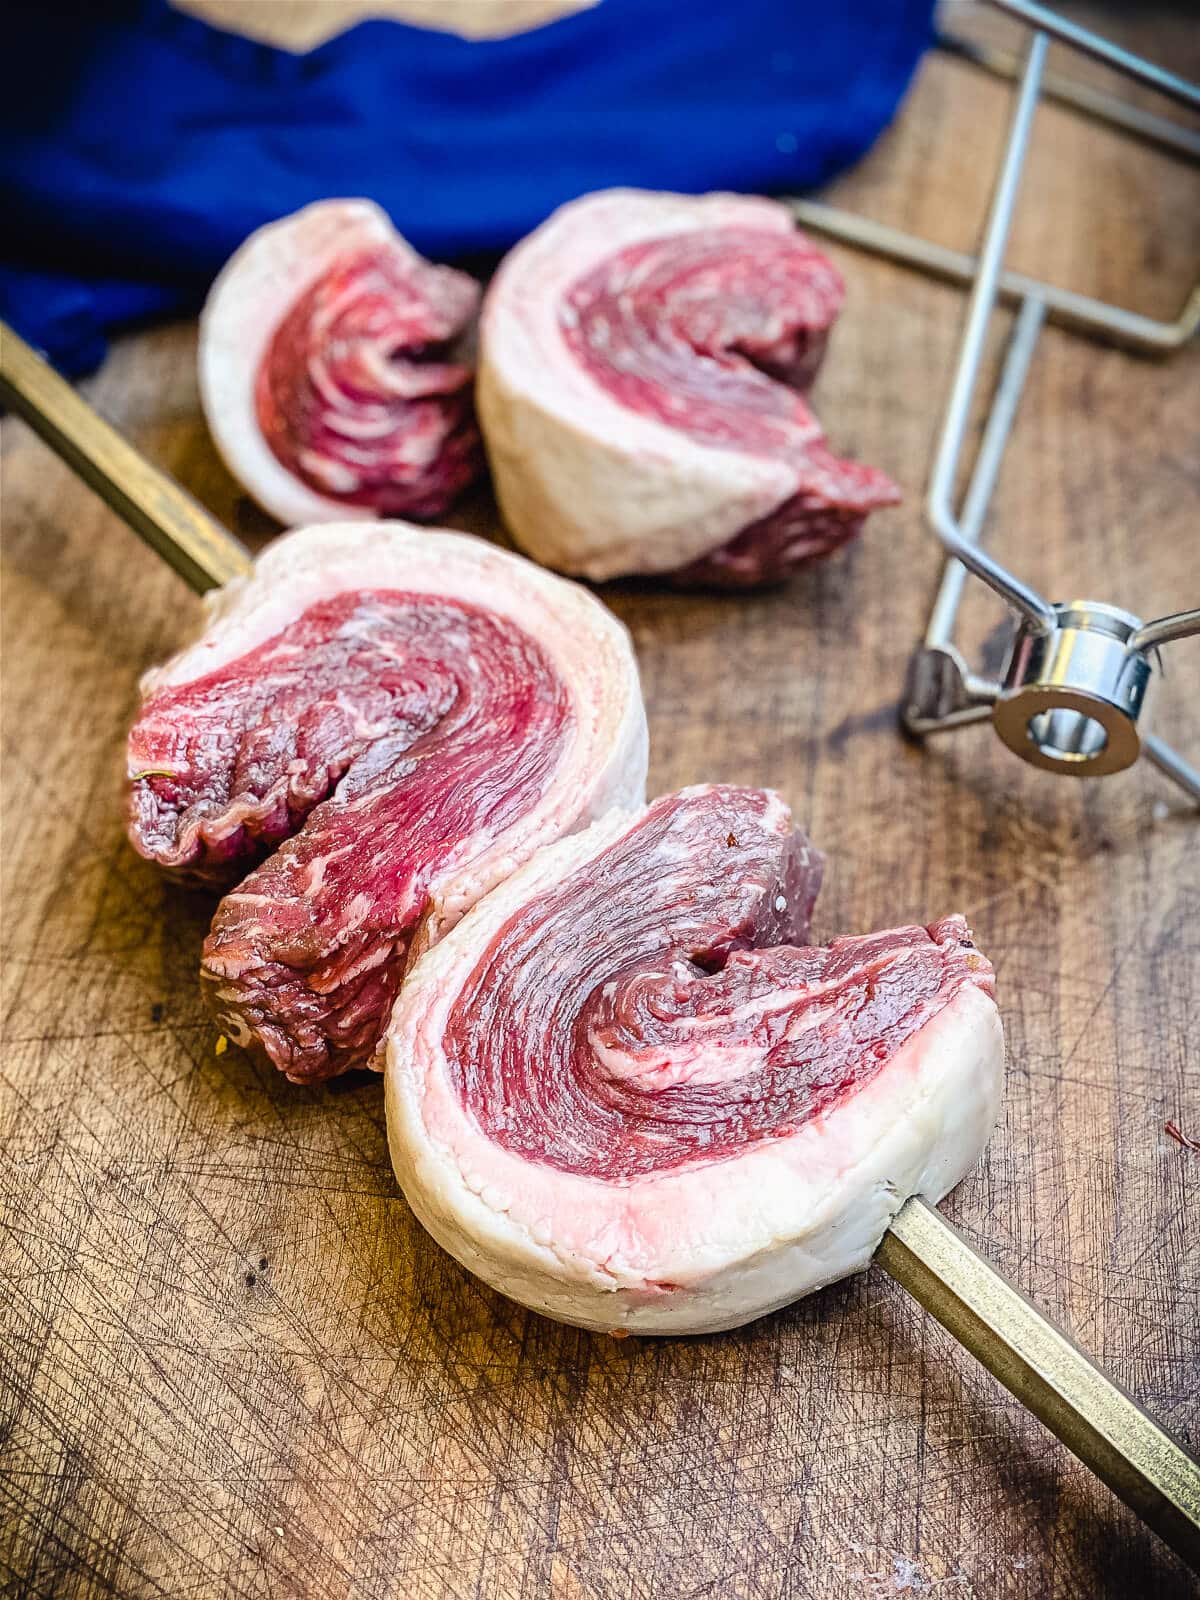 picanha being put on a rotisserie spit